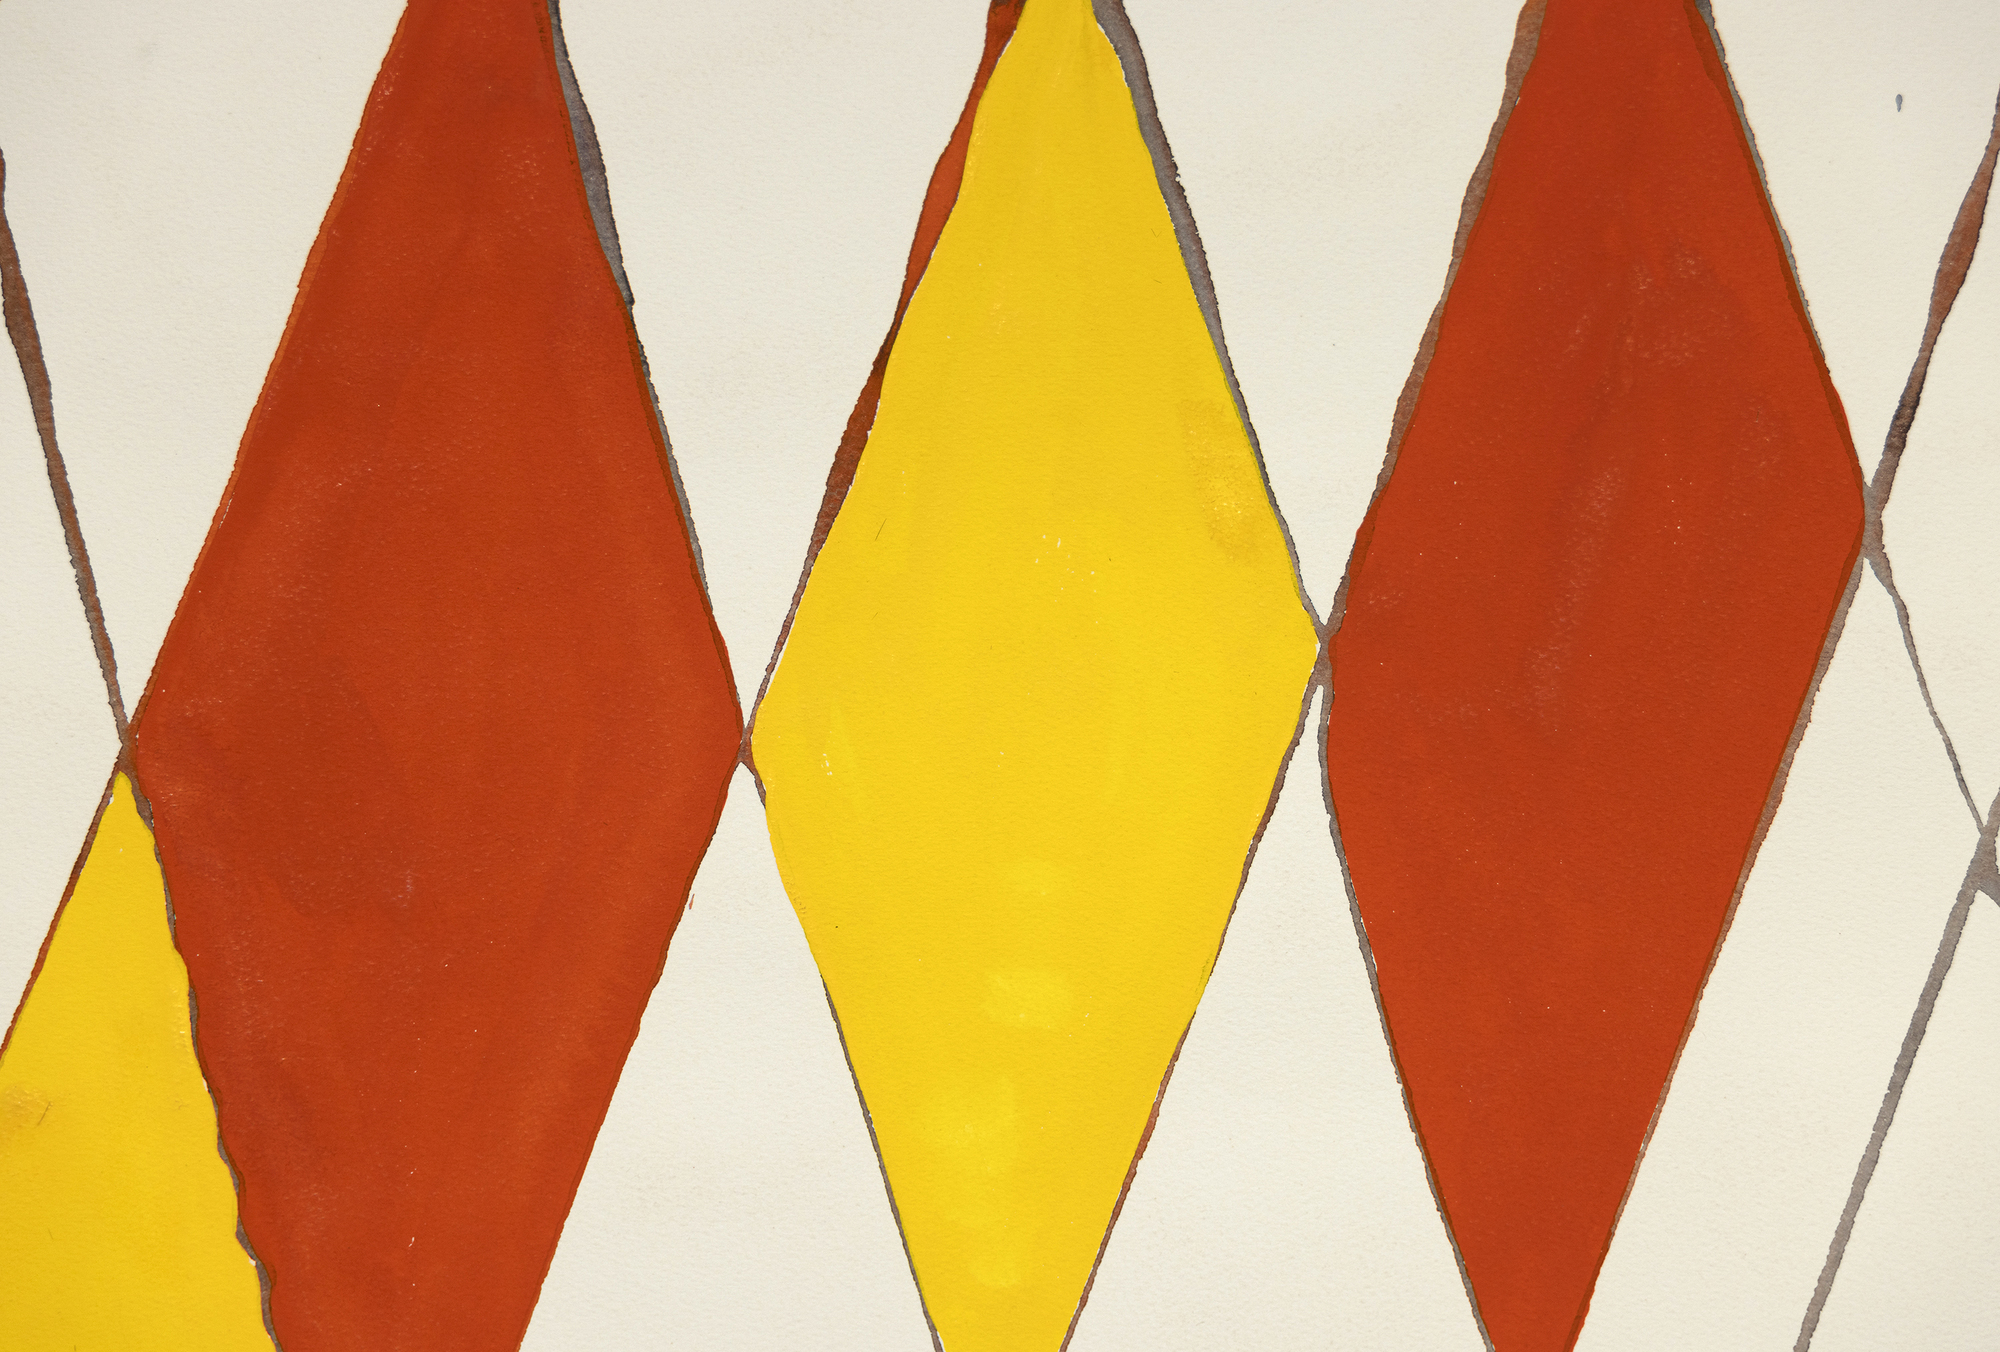 "Wigwam rouge et jaune", a captivating gouache painting by Alexander Calder, is a vibrant exploration of design and color. Dominated by a lattice of diagonal lines intersecting near their pinnacle, the composition exudes a dynamic balance. Calder introduces an element of whimsy with red and yellow diamond shapes, infusing the piece with playfulness and creating a festive atmosphere. Red balls at the right-leaning lines' apex evoke a whimsical impression, while smaller gray spheres atop left-leaning lines offer contrast and equilibrium. Calder's masterful fusion of simplicity and vital design elements makes Wigwam rouge et jaune a visual delight.